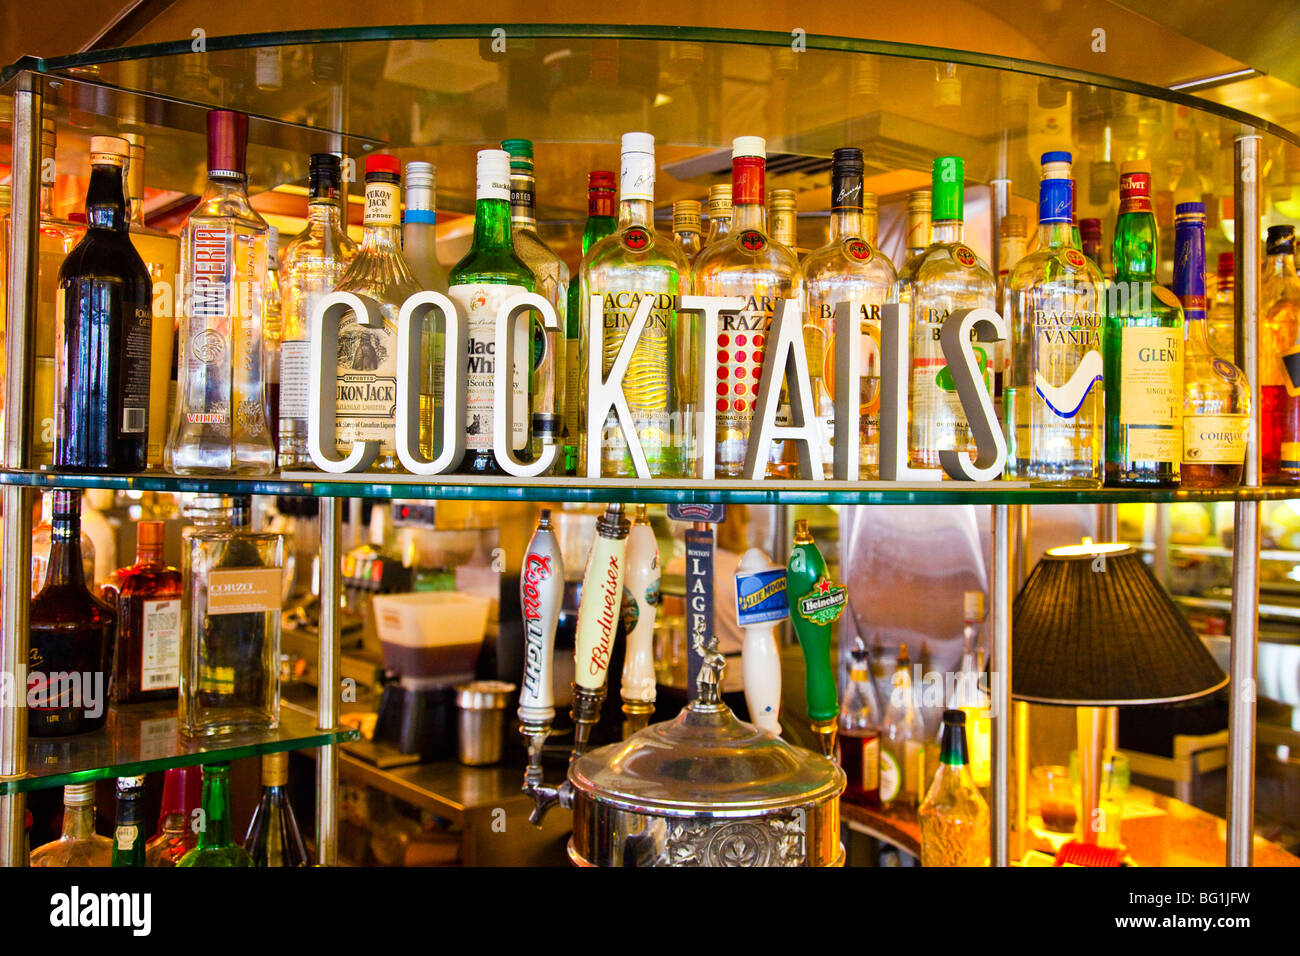 Coctails sign in front of alcohol bottles in the United States Stock Photo